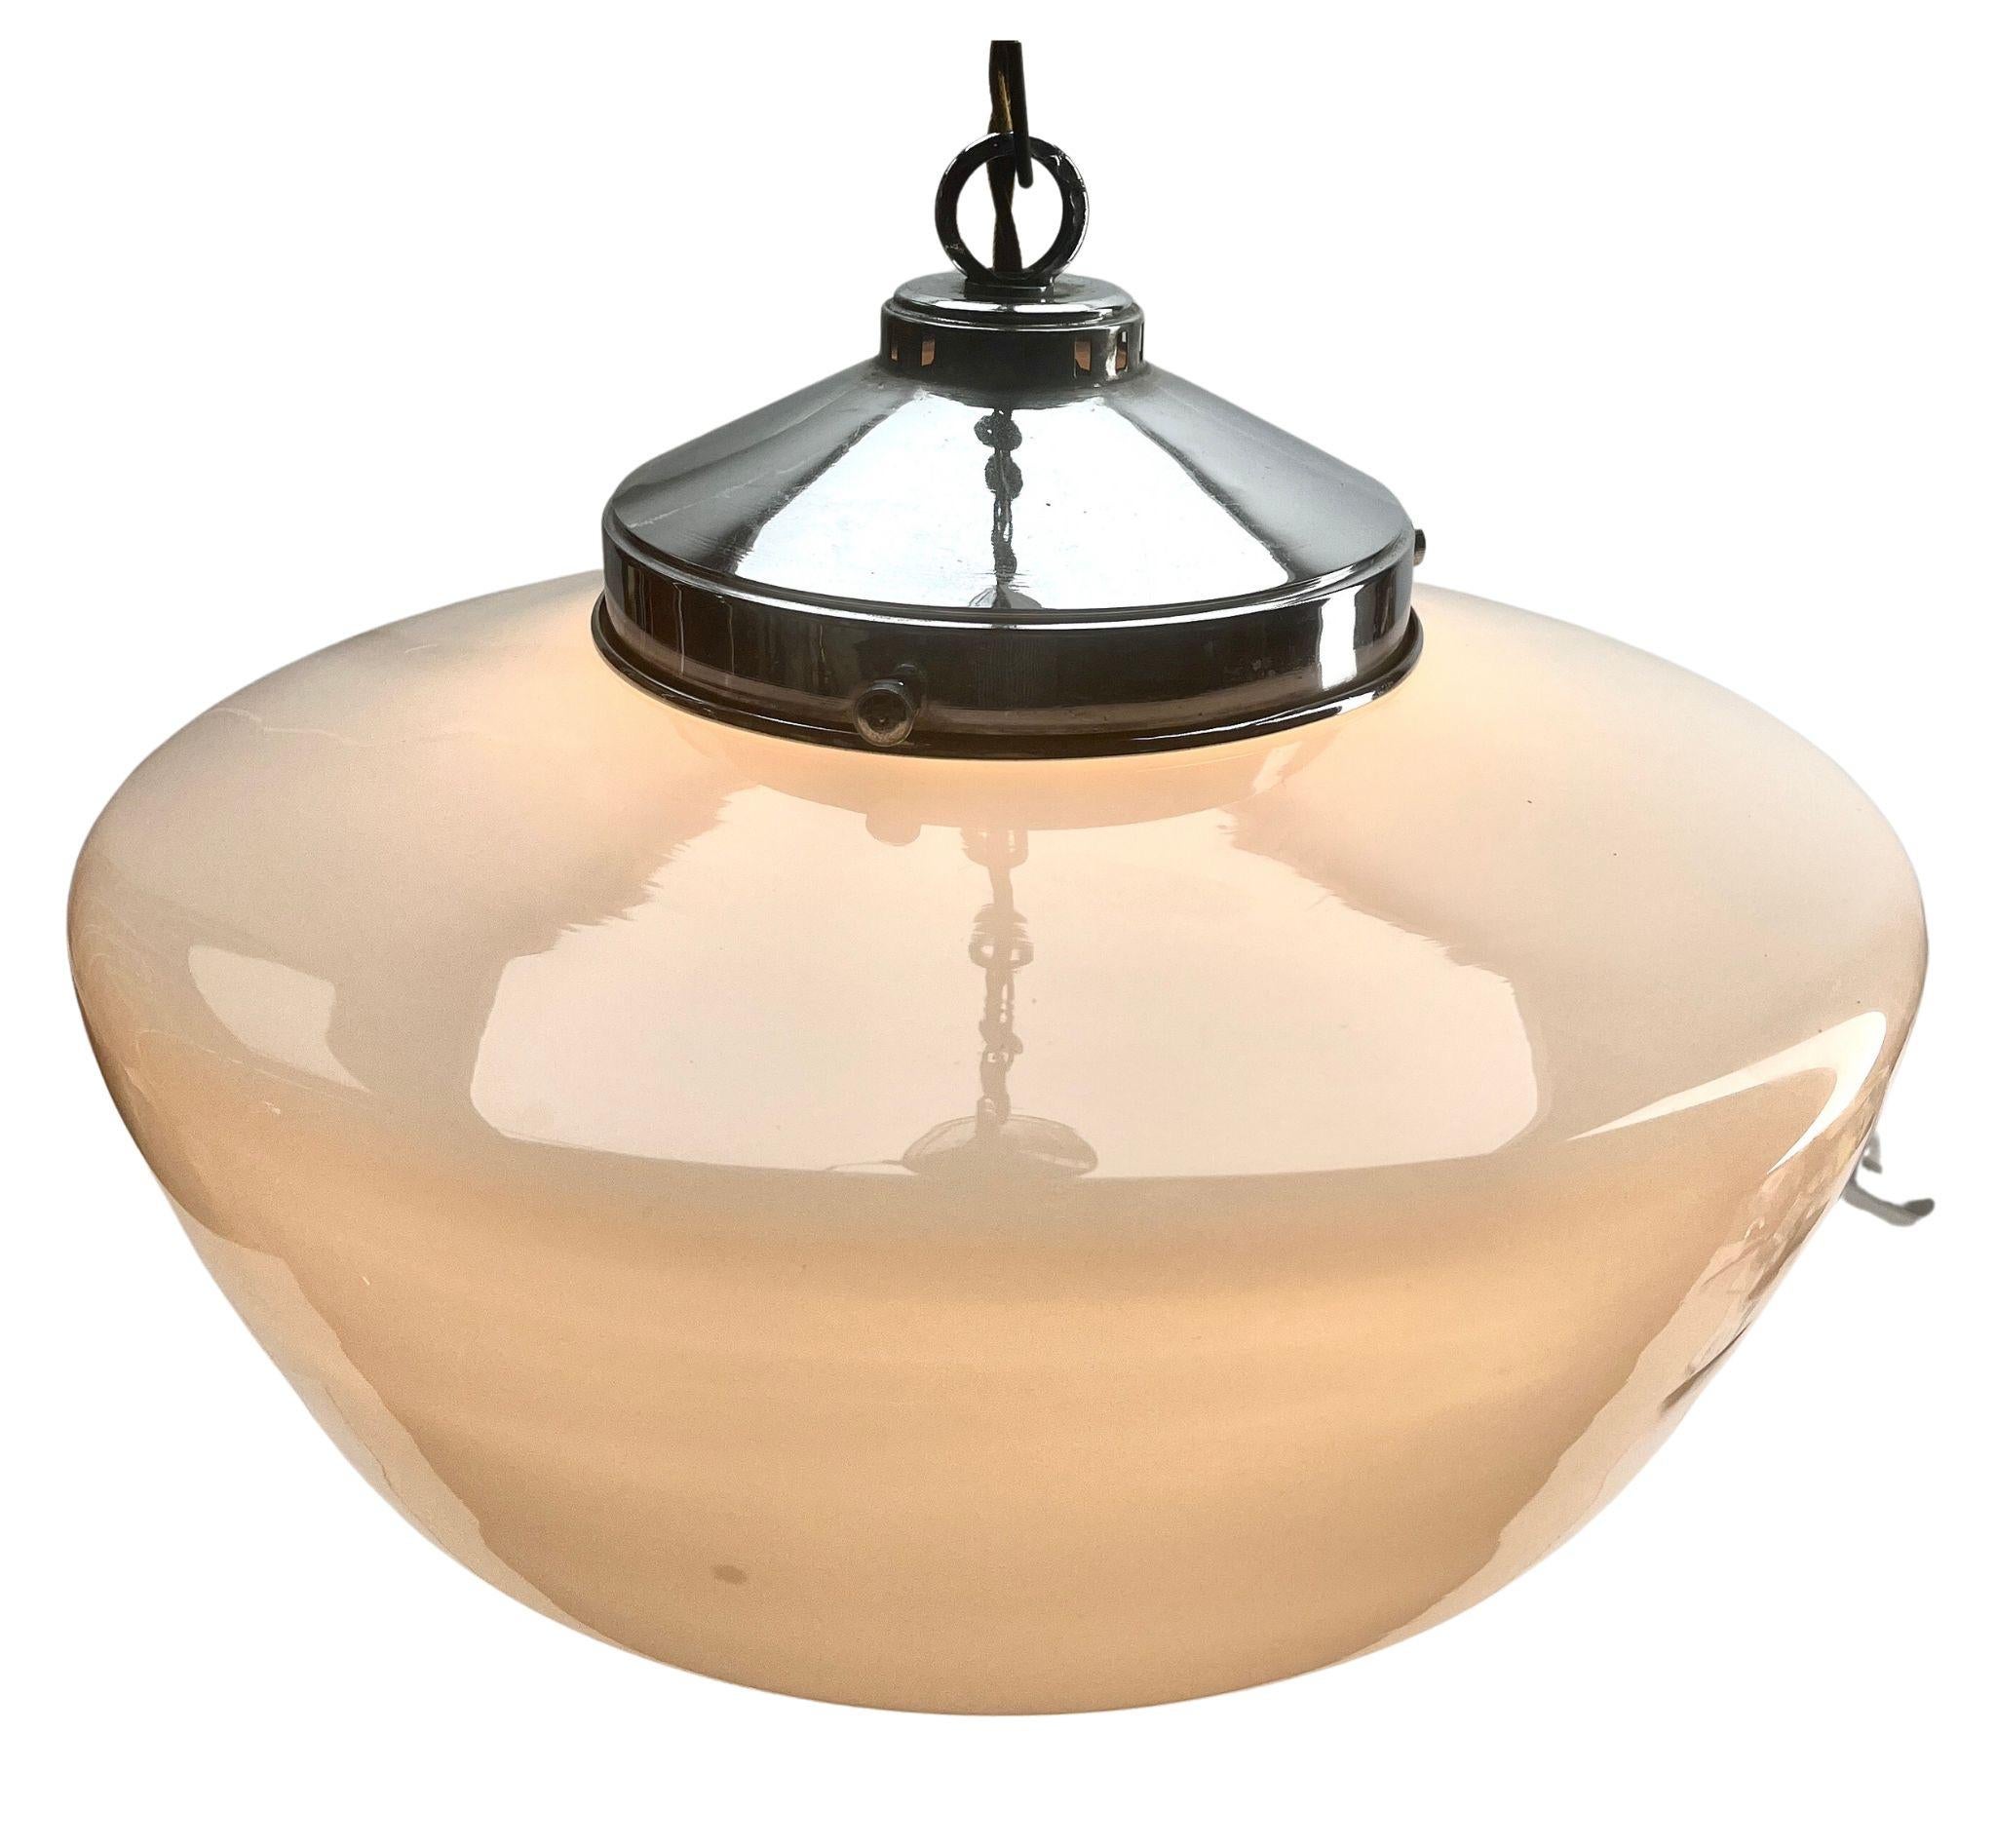 Blown Glass Phillips Pendant Lamp with a Opaline Shade and Chrome Fittings, 1930s, Holland For Sale